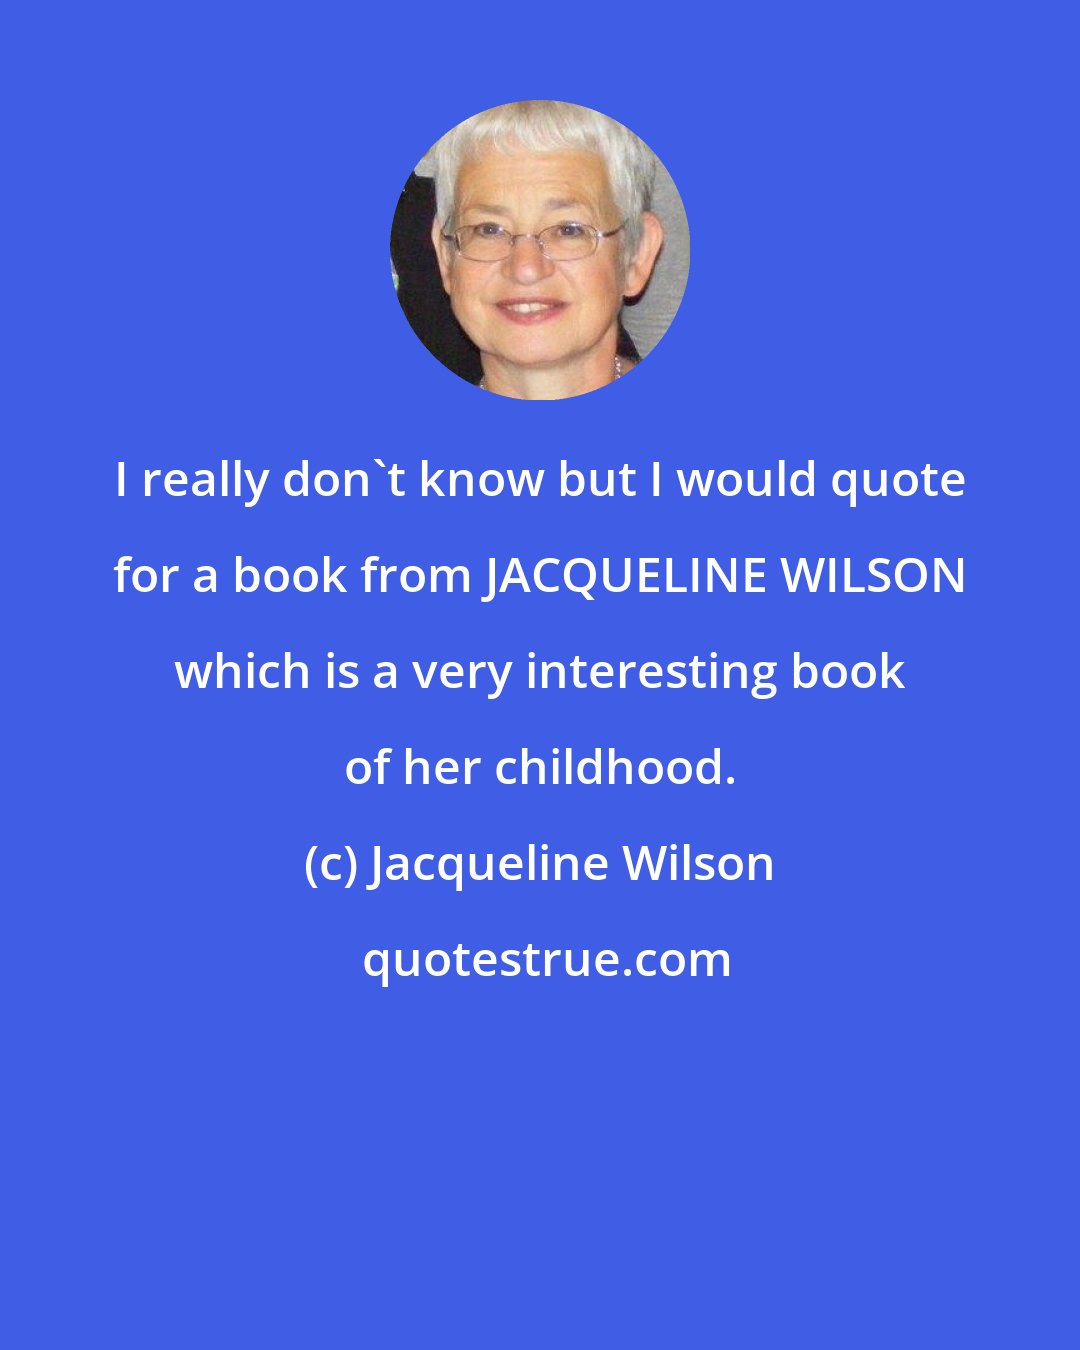 Jacqueline Wilson: I really don't know but I would quote for a book from JACQUELINE WILSON which is a very interesting book of her childhood.